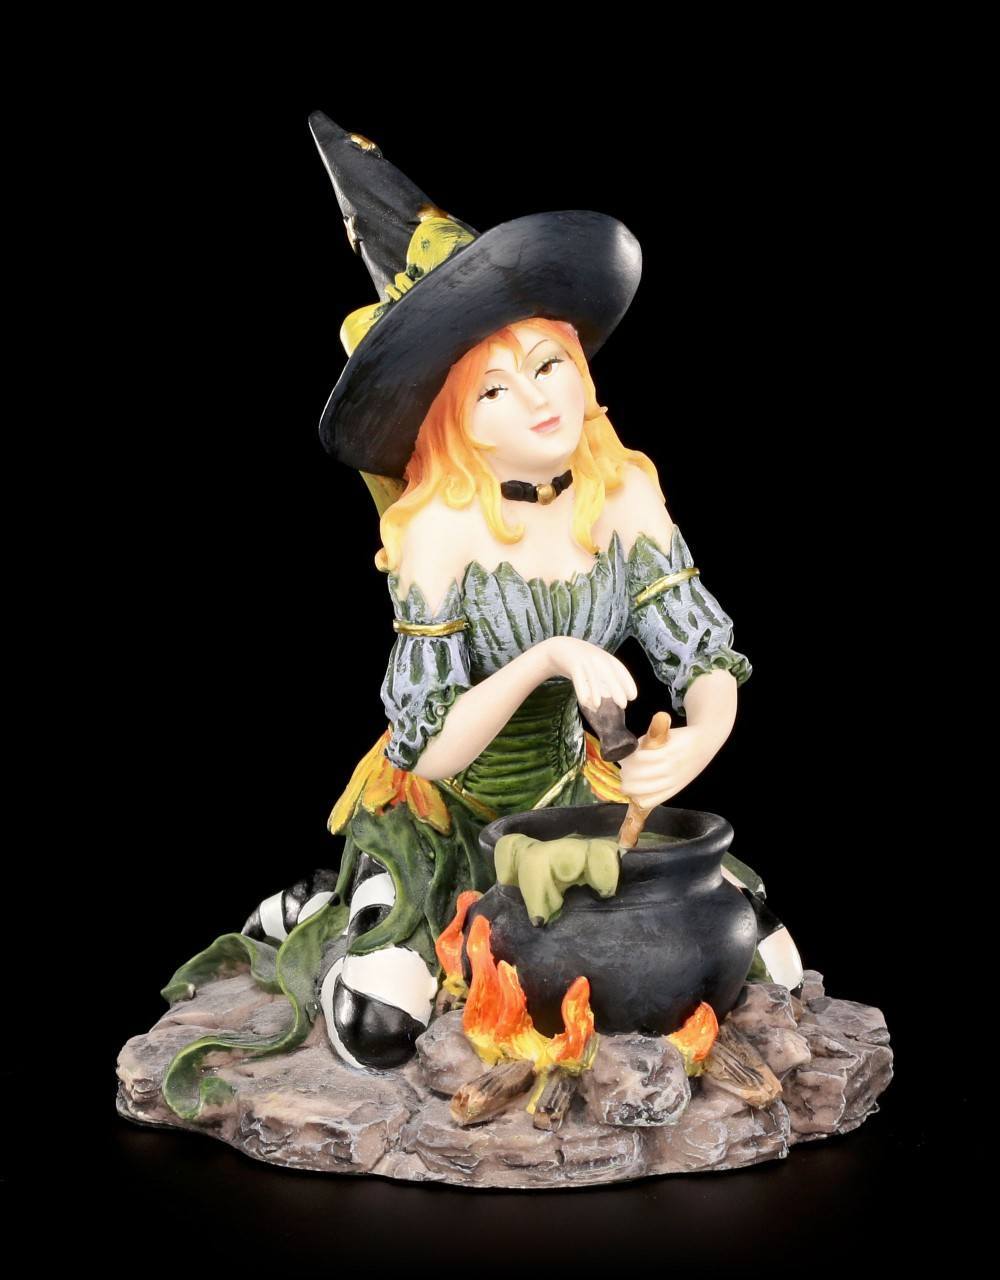 Witch Figurine - Harlequin with Herbs and Spices